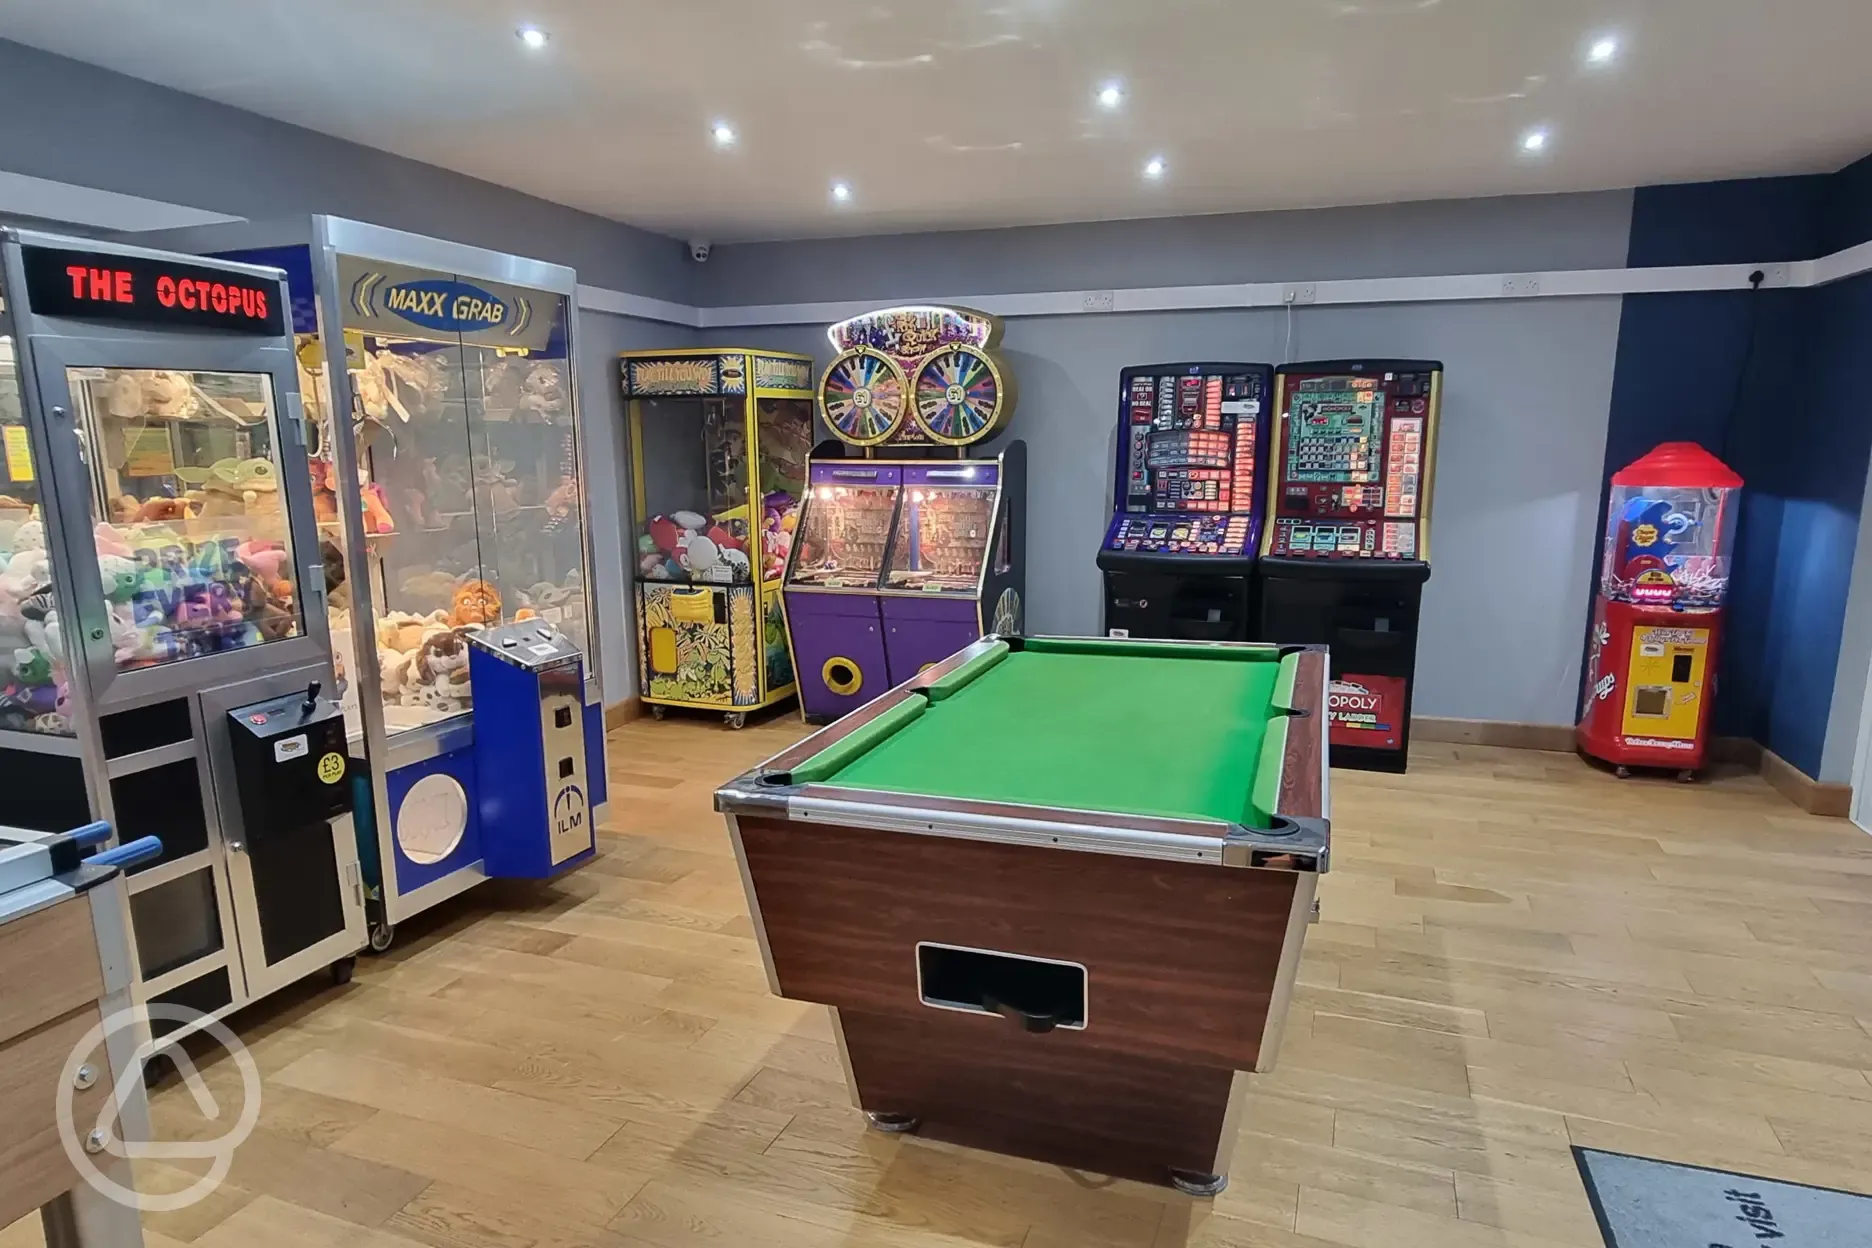 Games room open from 9am-9pm